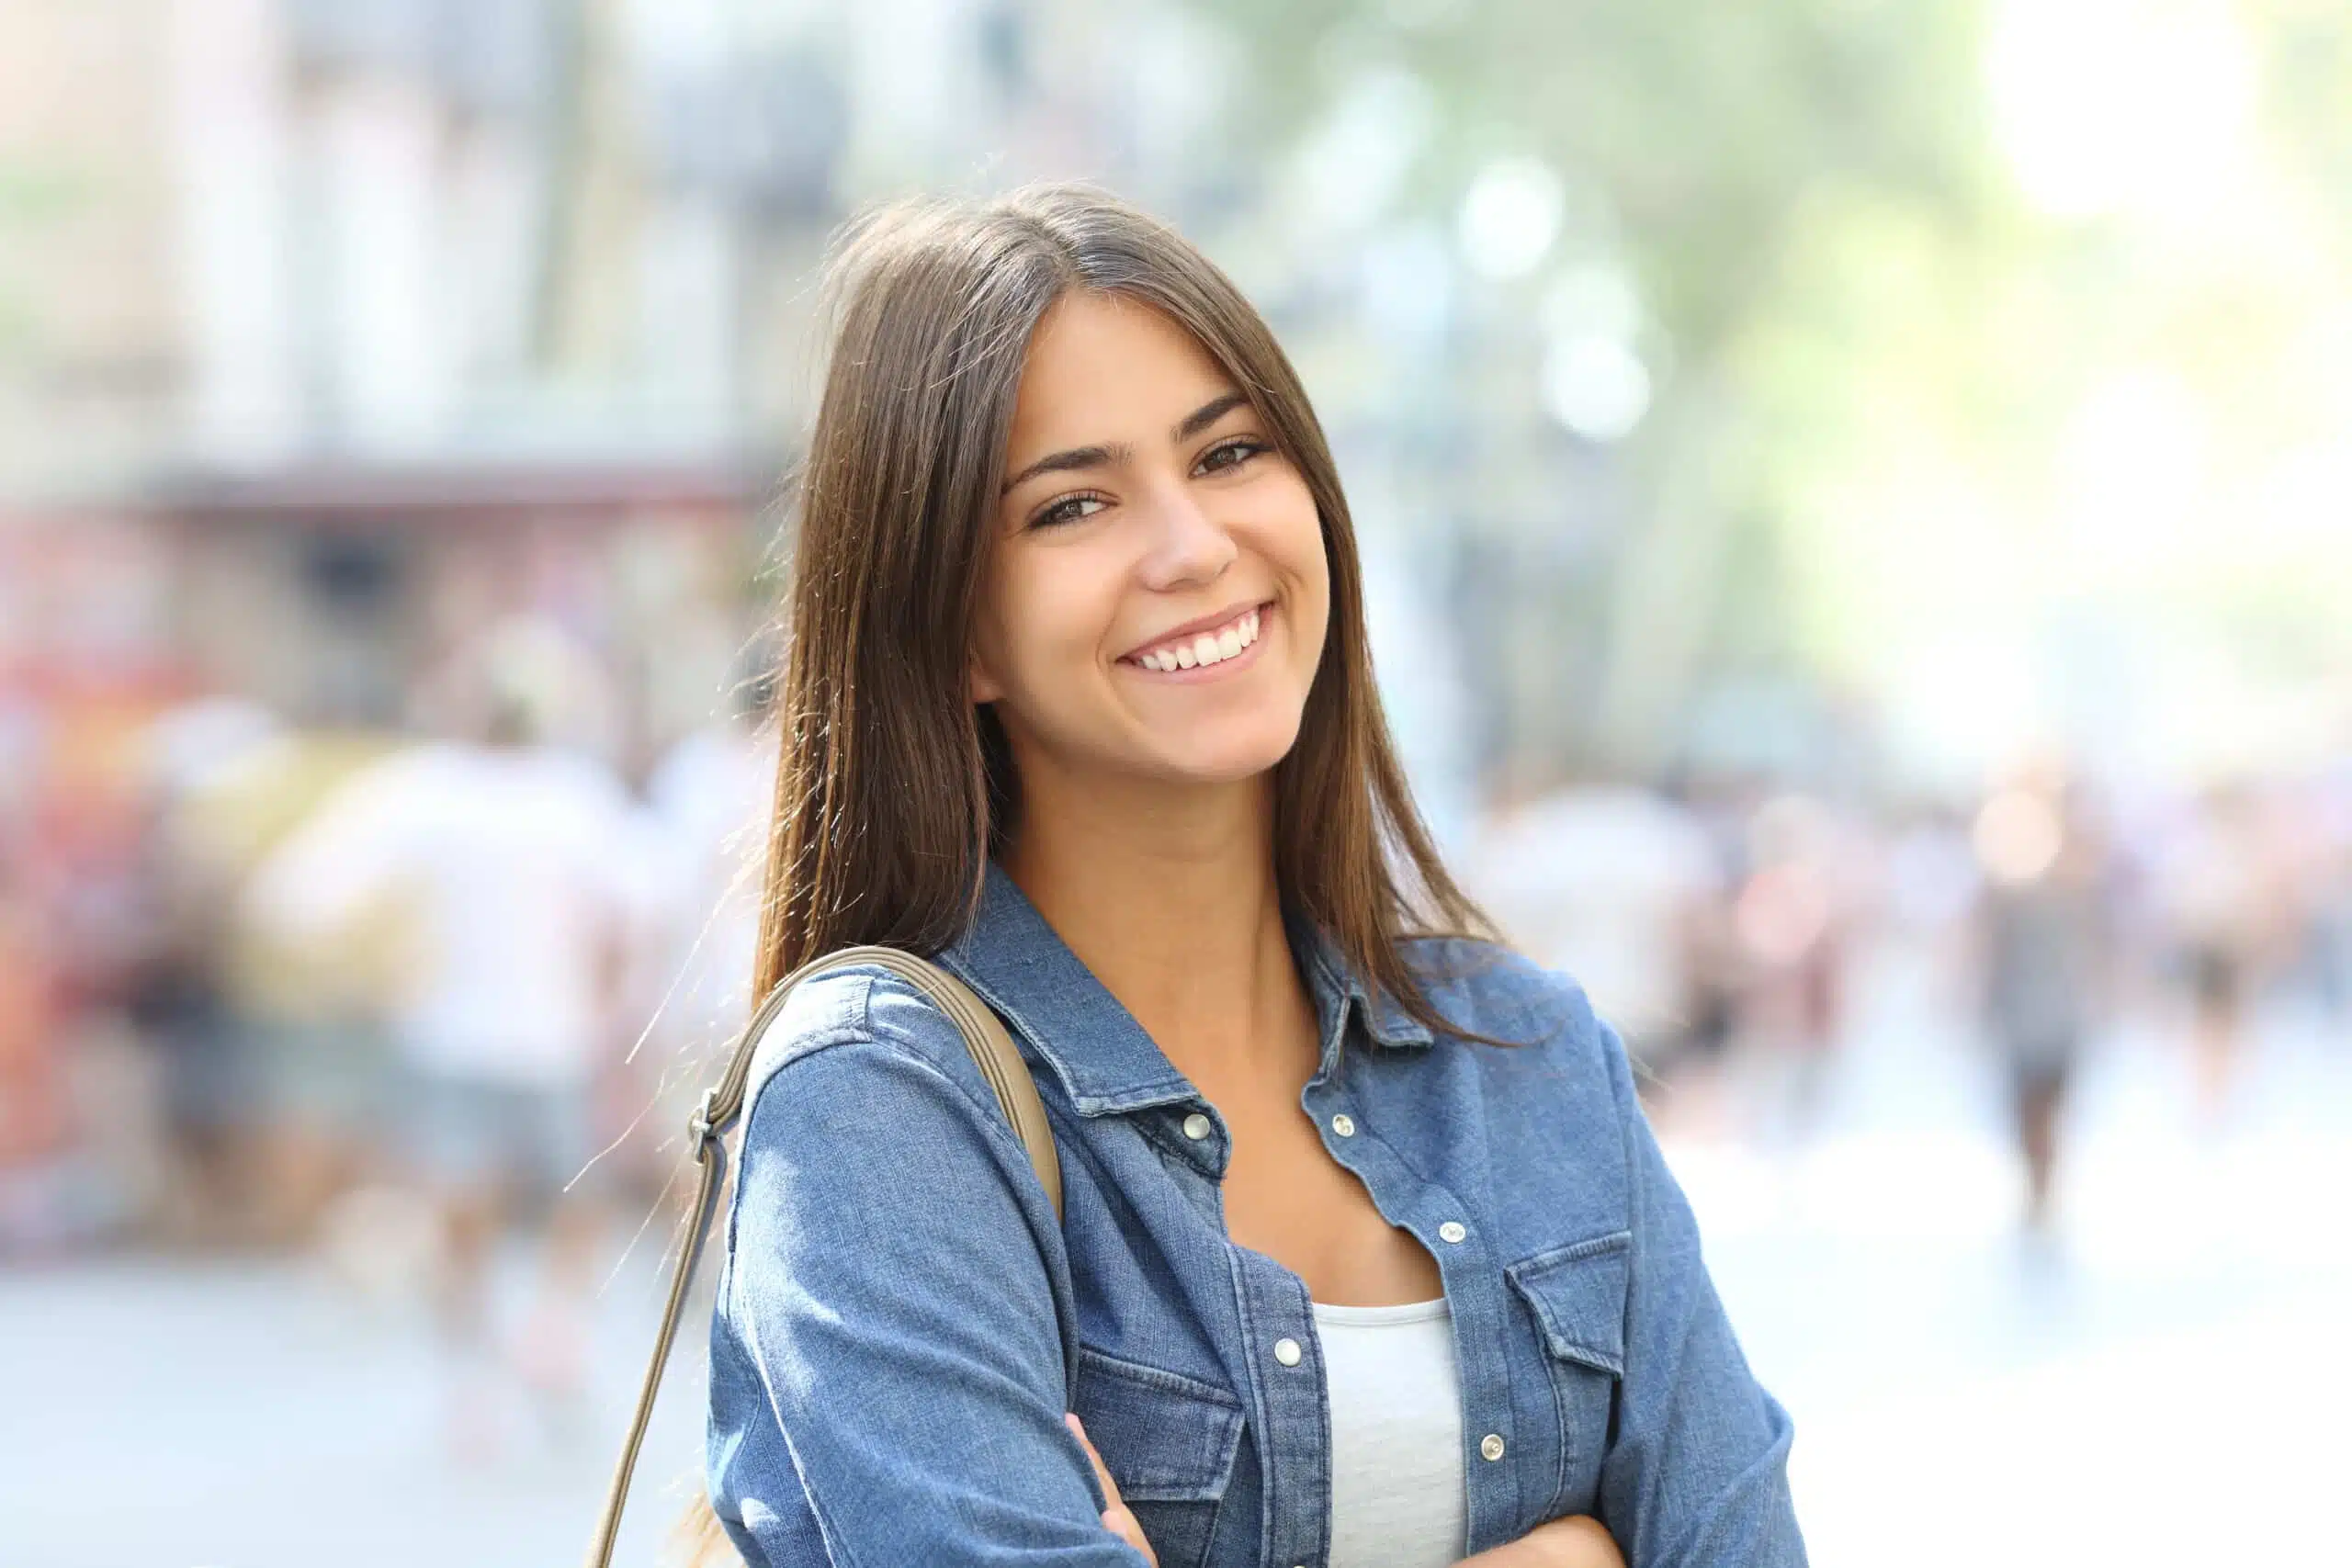 Clear aligners are a popular option for both adults and teens to straighten their smiles.